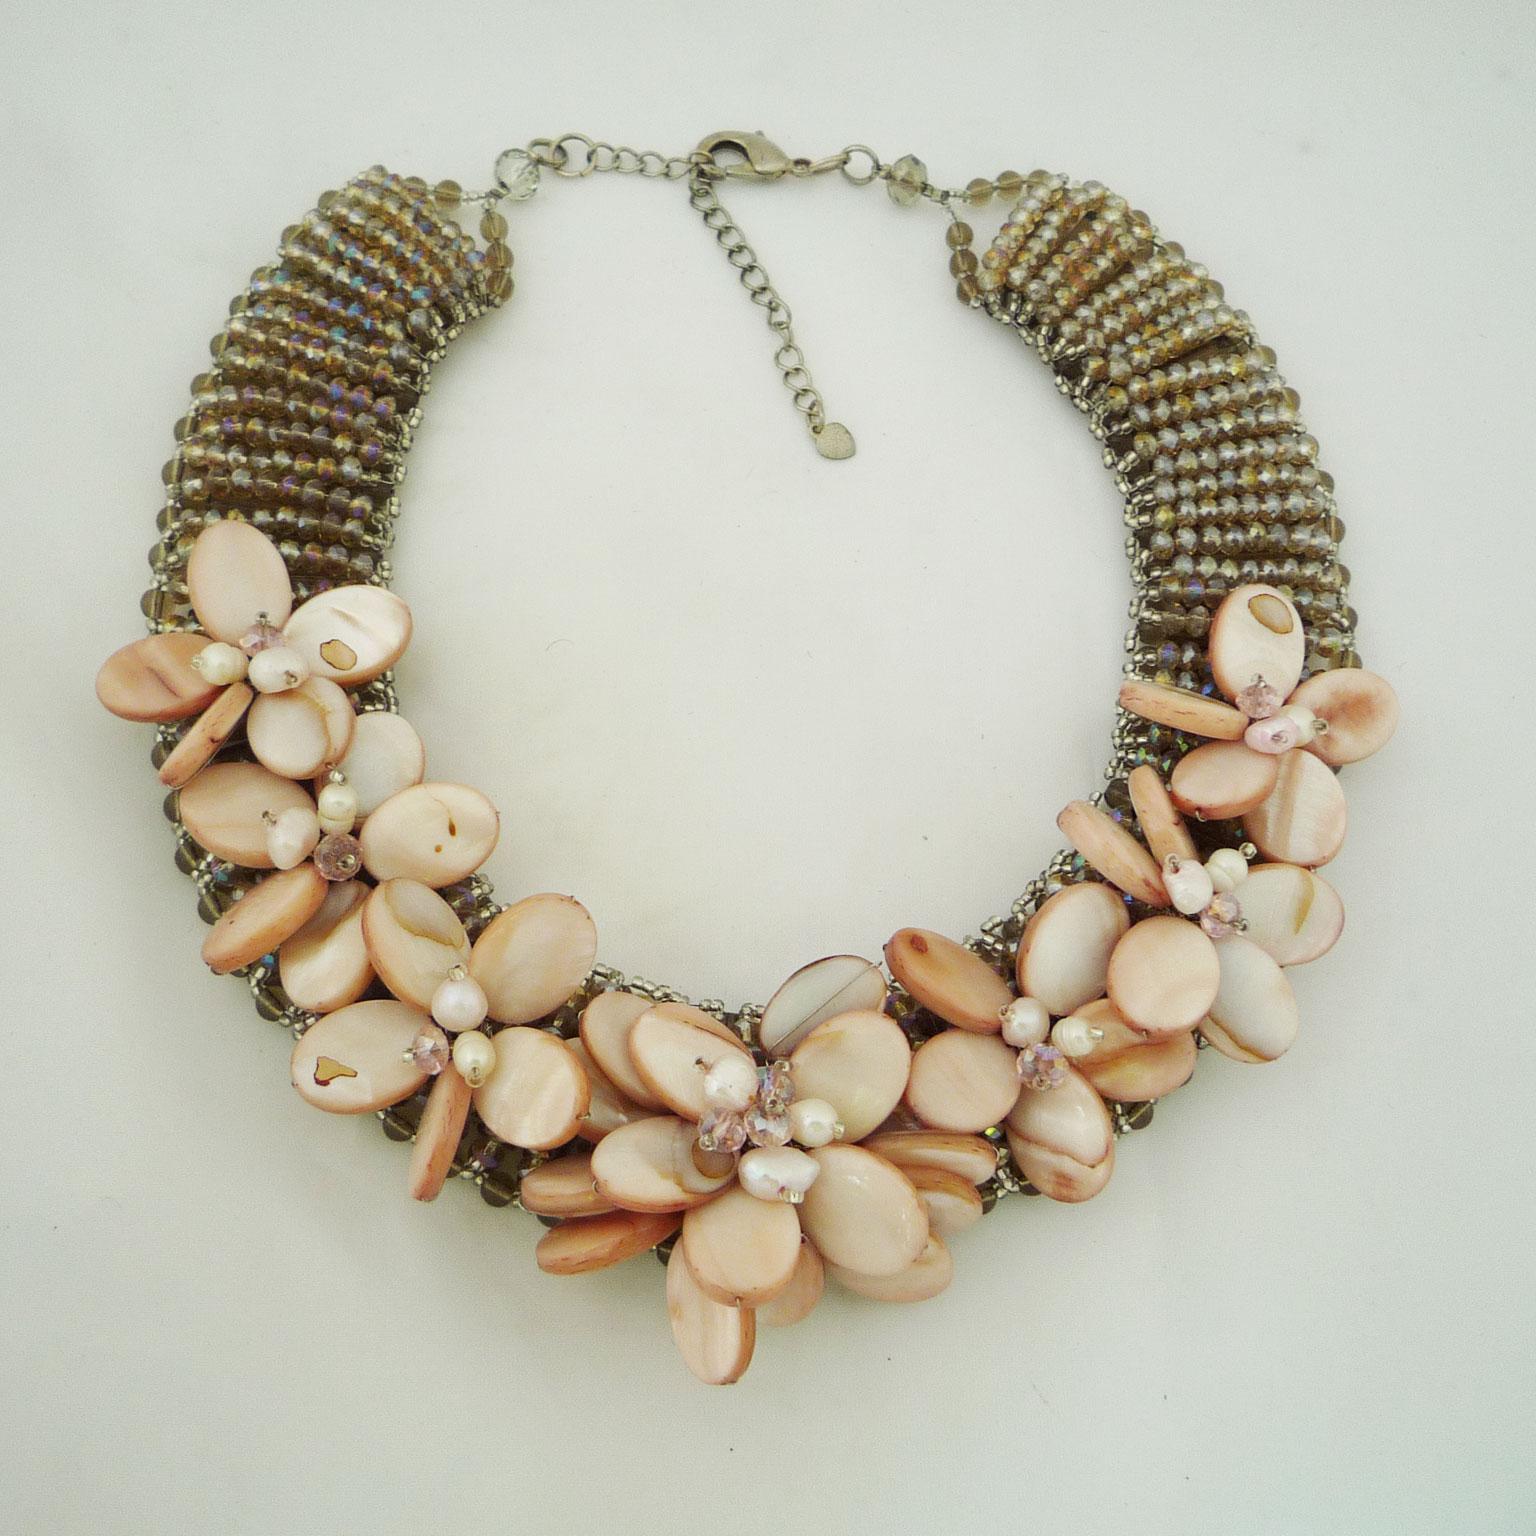 Bead Necklace made of mother-of-pearl, freshwater pearls and Swarovski pearls